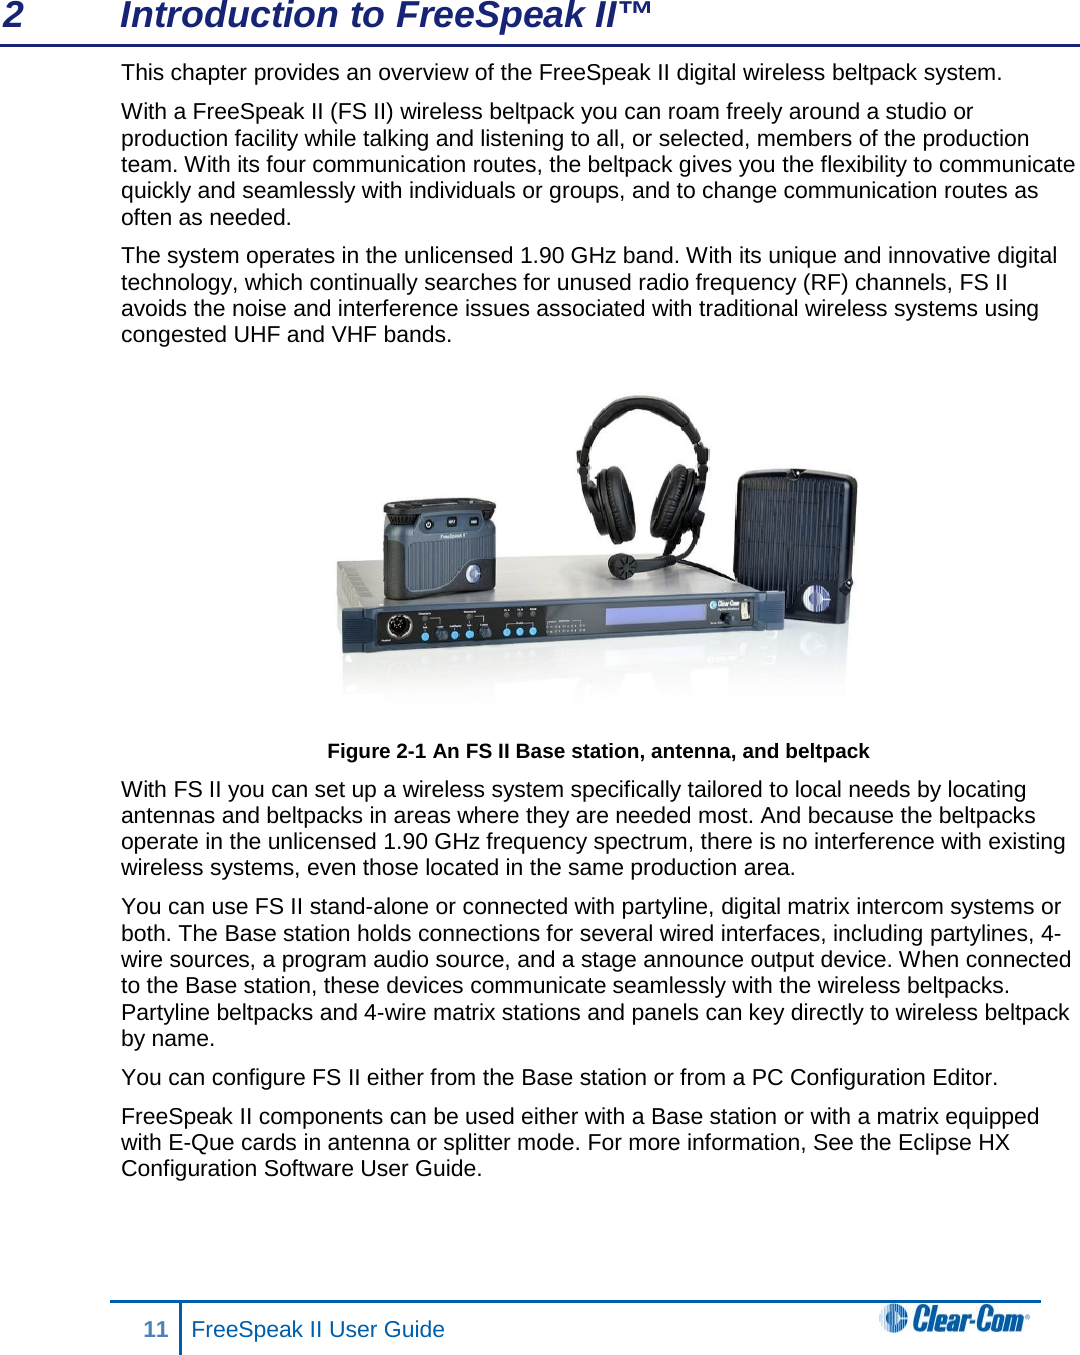 2  Introduction to FreeSpeak II™ This chapter provides an overview of the FreeSpeak II digital wireless beltpack system.  With a FreeSpeak II (FS II) wireless beltpack you can roam freely around a studio or production facility while talking and listening to all, or selected, members of the production team. With its four communication routes, the beltpack gives you the flexibility to communicate quickly and seamlessly with individuals or groups, and to change communication routes as often as needed. The system operates in the unlicensed 1.90 GHz band. With its unique and innovative digital technology, which continually searches for unused radio frequency (RF) channels, FS II avoids the noise and interference issues associated with traditional wireless systems using congested UHF and VHF bands.  Figure 2-1 An FS II Base station, antenna, and beltpack With FS II you can set up a wireless system specifically tailored to local needs by locating antennas and beltpacks in areas where they are needed most. And because the beltpacks operate in the unlicensed 1.90 GHz frequency spectrum, there is no interference with existing wireless systems, even those located in the same production area.  You can use FS II stand-alone or connected with partyline, digital matrix intercom systems or both. The Base station holds connections for several wired interfaces, including partylines, 4-wire sources, a program audio source, and a stage announce output device. When connected to the Base station, these devices communicate seamlessly with the wireless beltpacks. Partyline beltpacks and 4-wire matrix stations and panels can key directly to wireless beltpack by name.  You can configure FS II either from the Base station or from a PC Configuration Editor. FreeSpeak II components can be used either with a Base station or with a matrix equipped with E-Que cards in antenna or splitter mode. For more information, See the Eclipse HX Configuration Software User Guide.   11 FreeSpeak II User Guide   